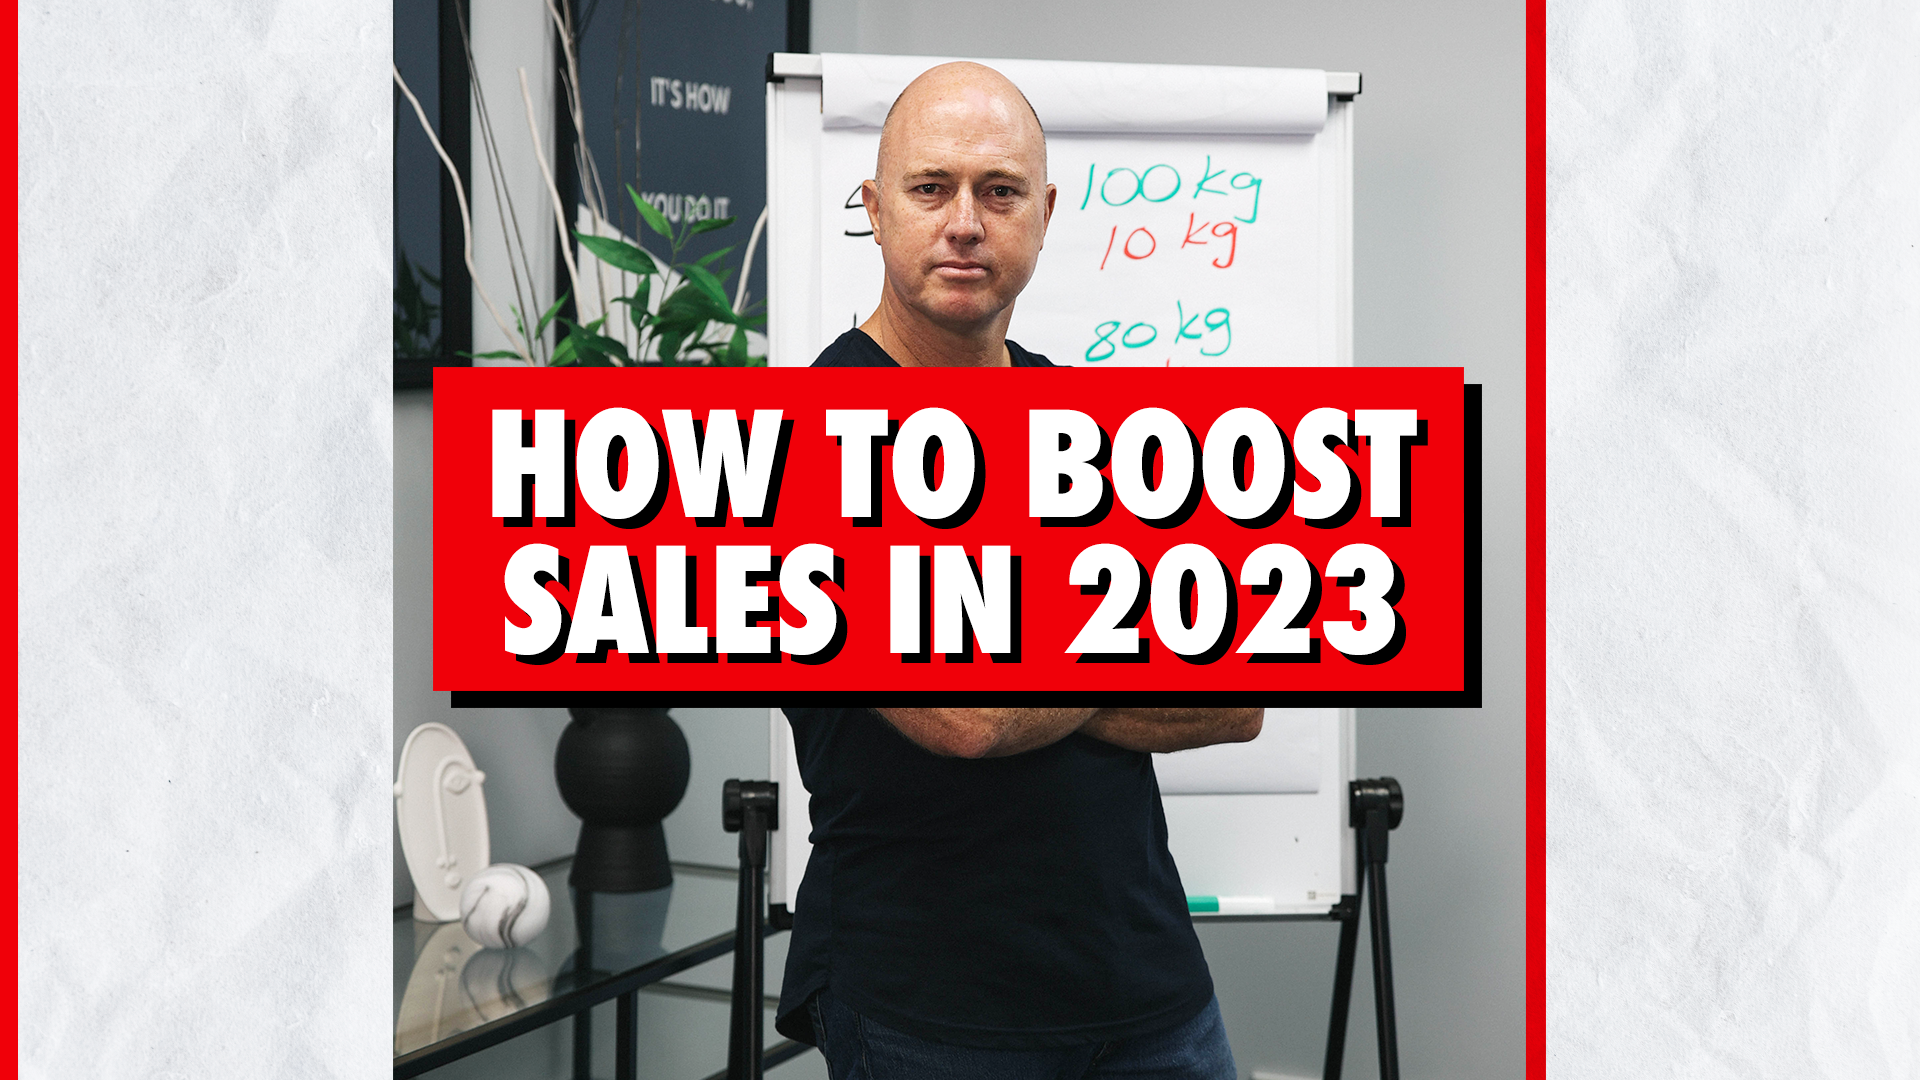 Trevor Ambrose Public Speaking Sales Training How To Boost Sales 2023 Thumbnail Website